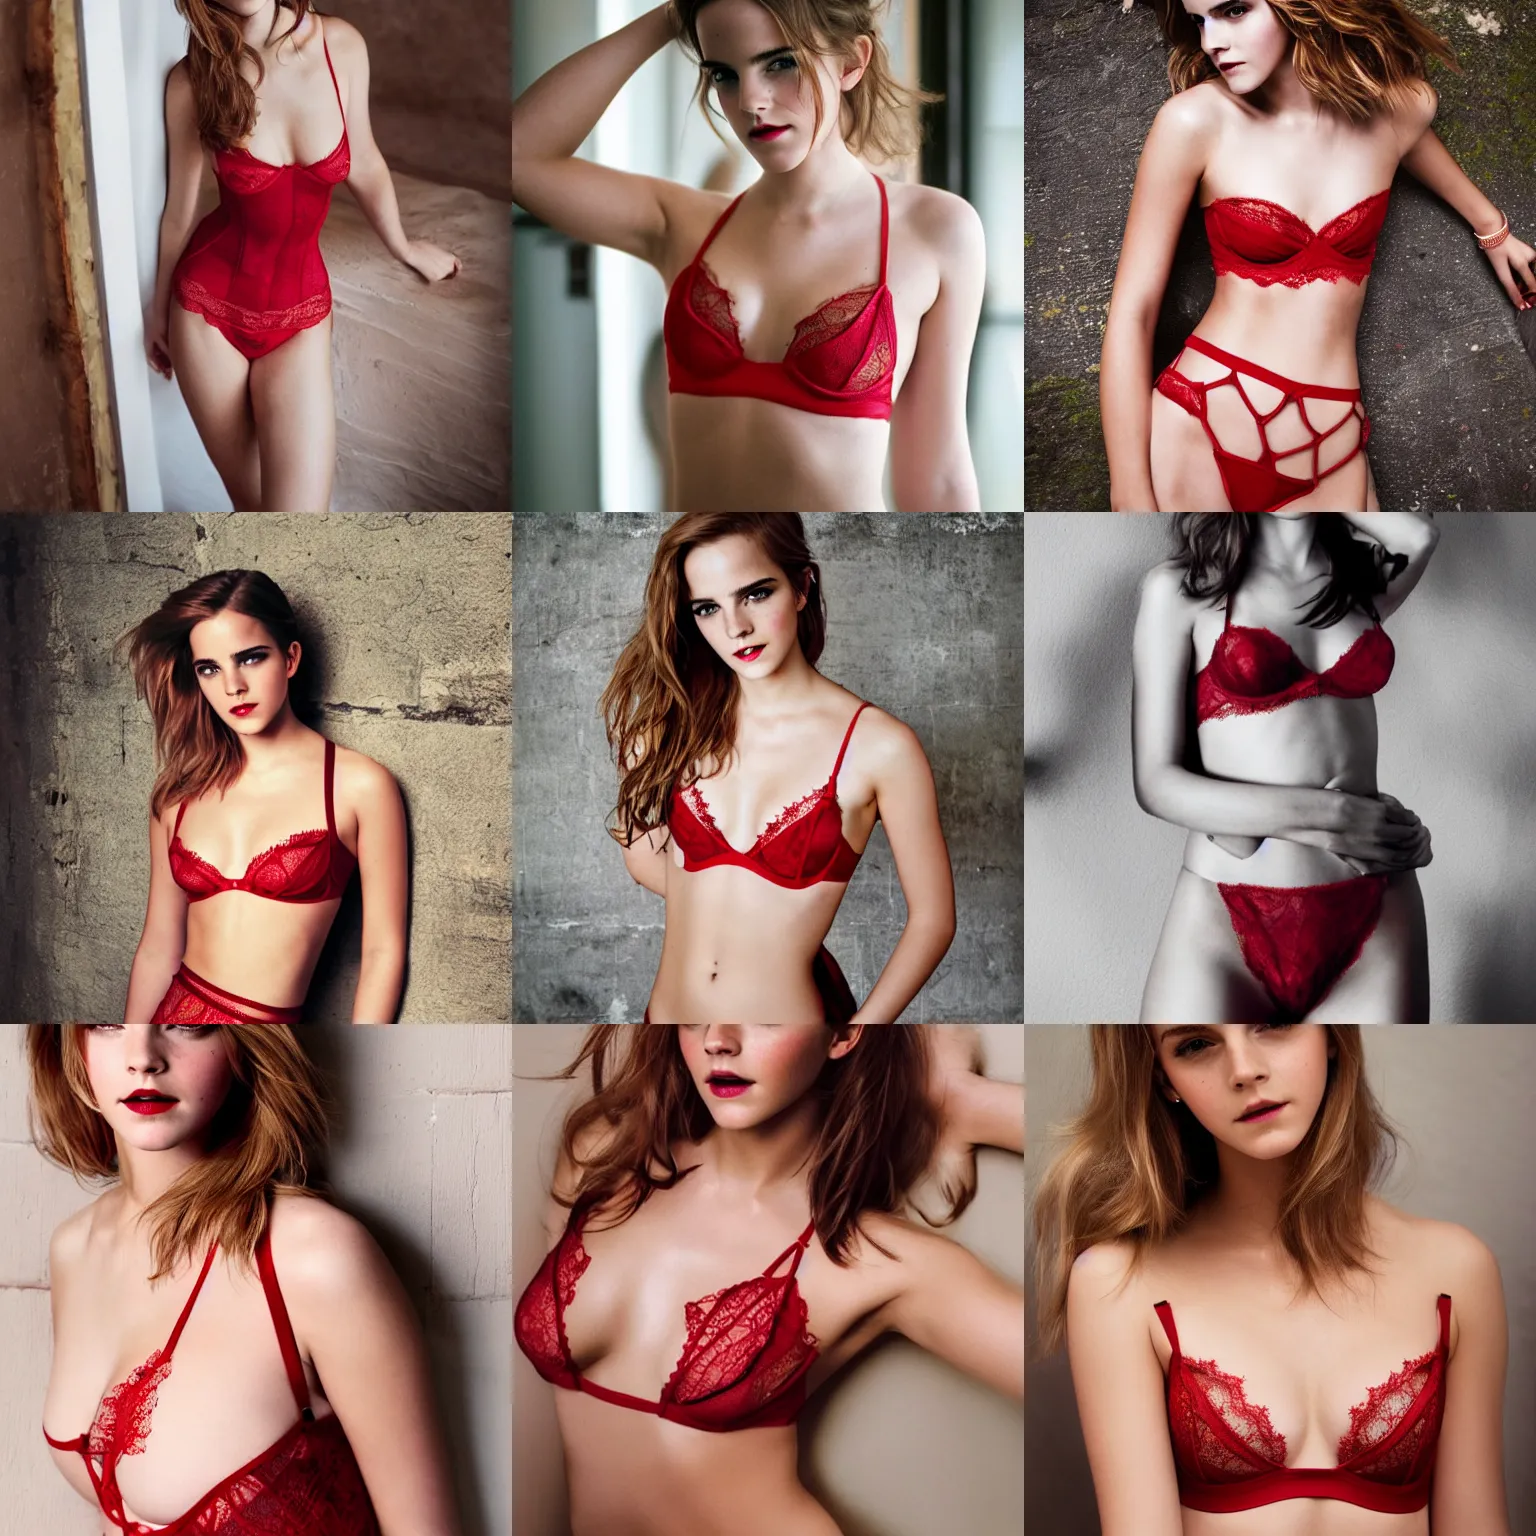 daryle baldwin recommends emma watson lingerie pic